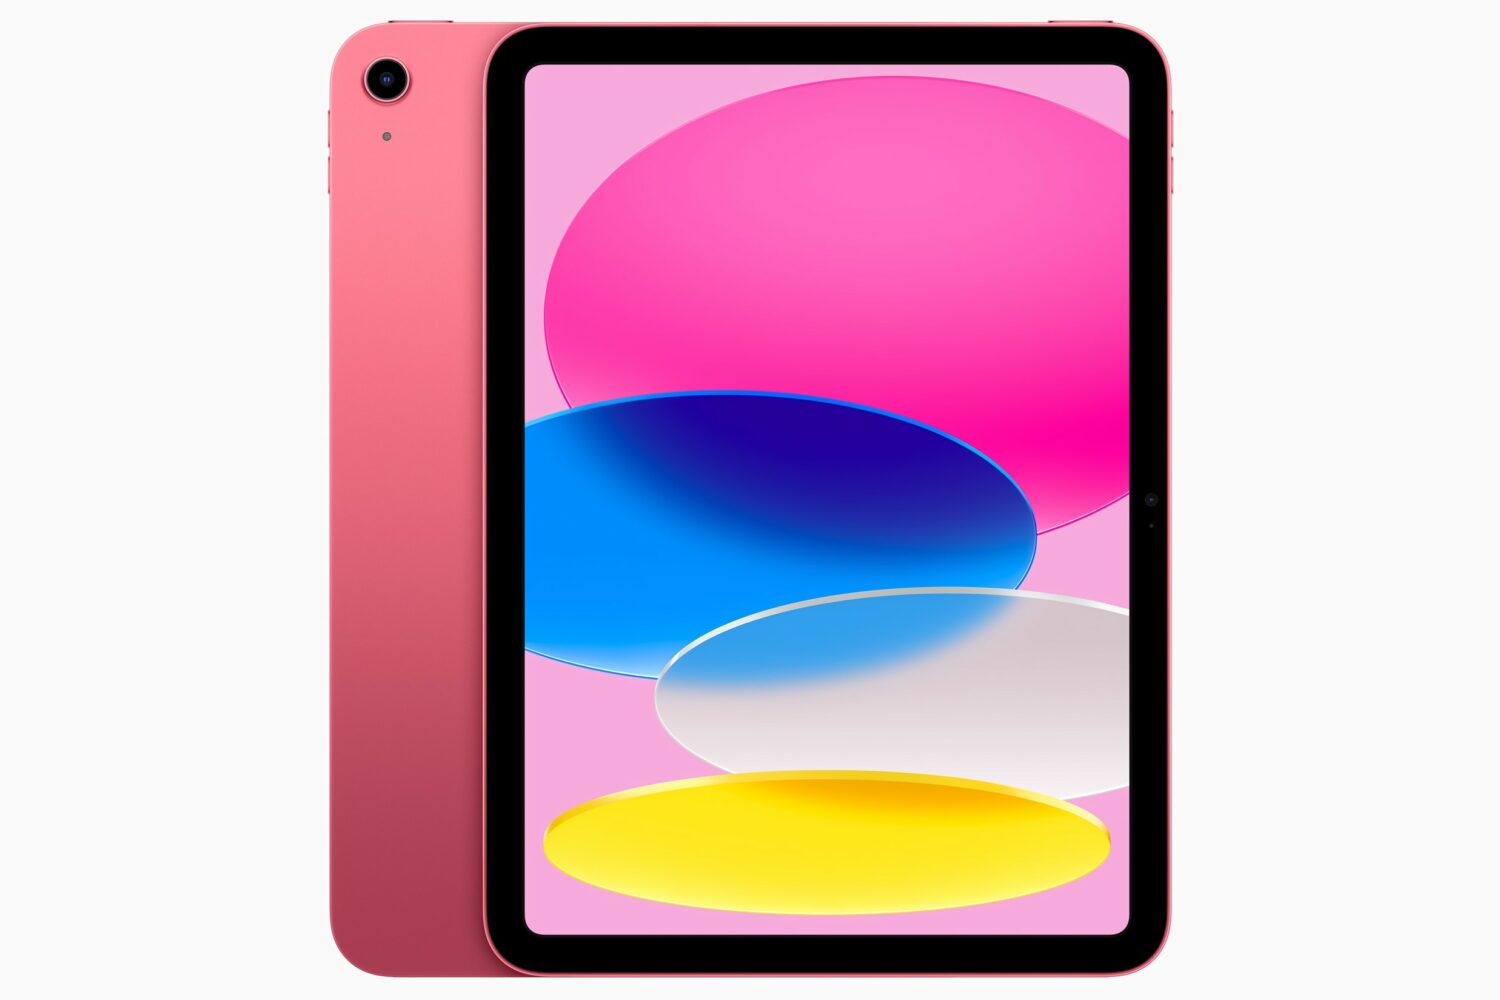 The tenth-generation iPad in pink